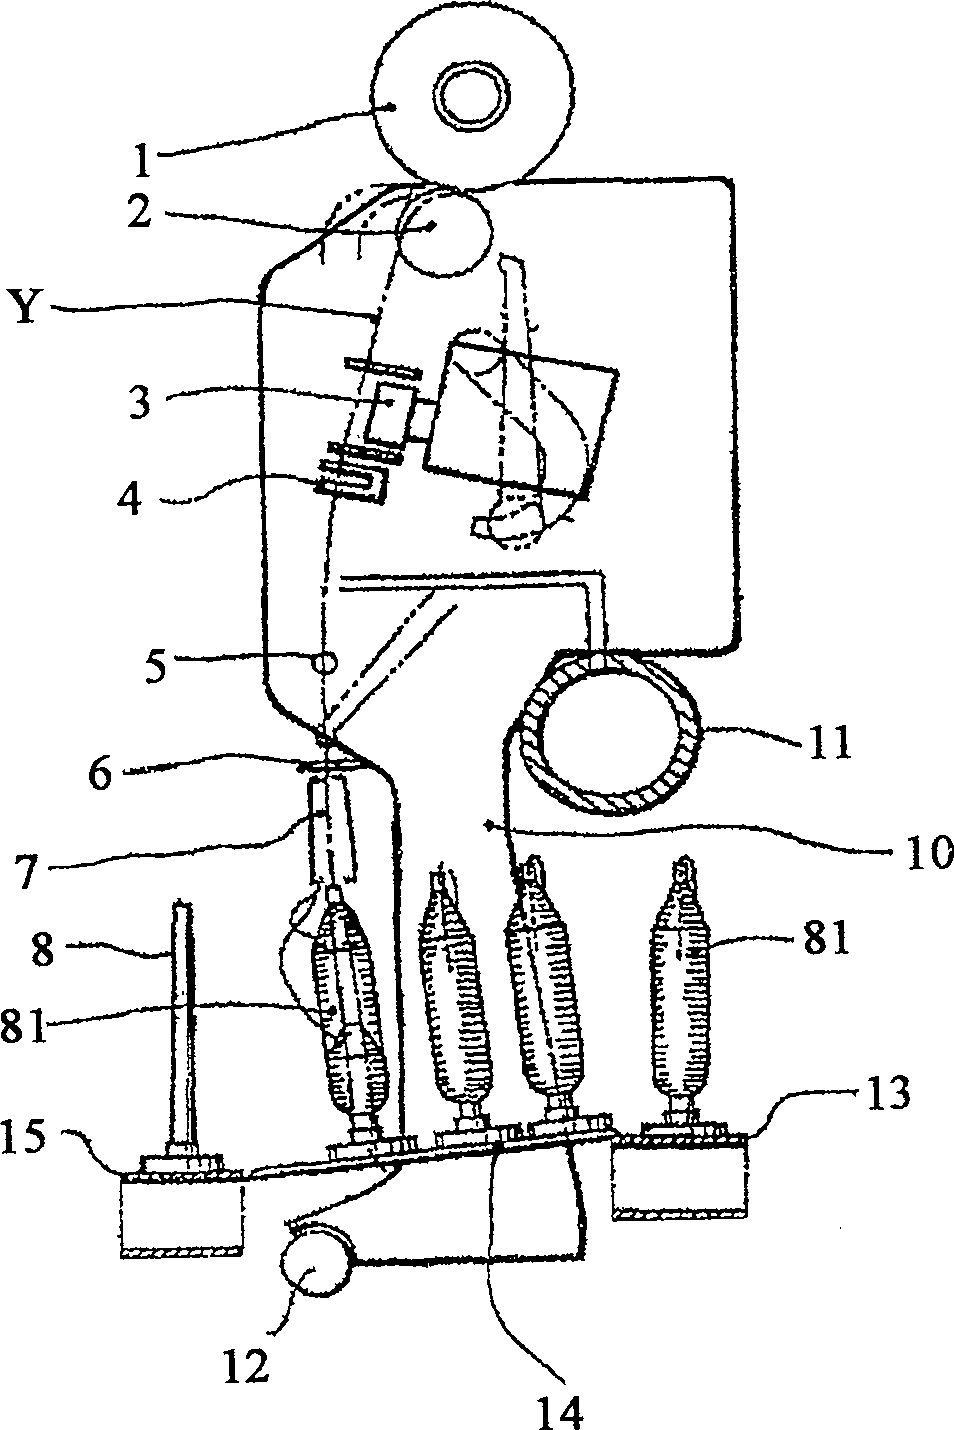 Process and device for rewinding feed spools